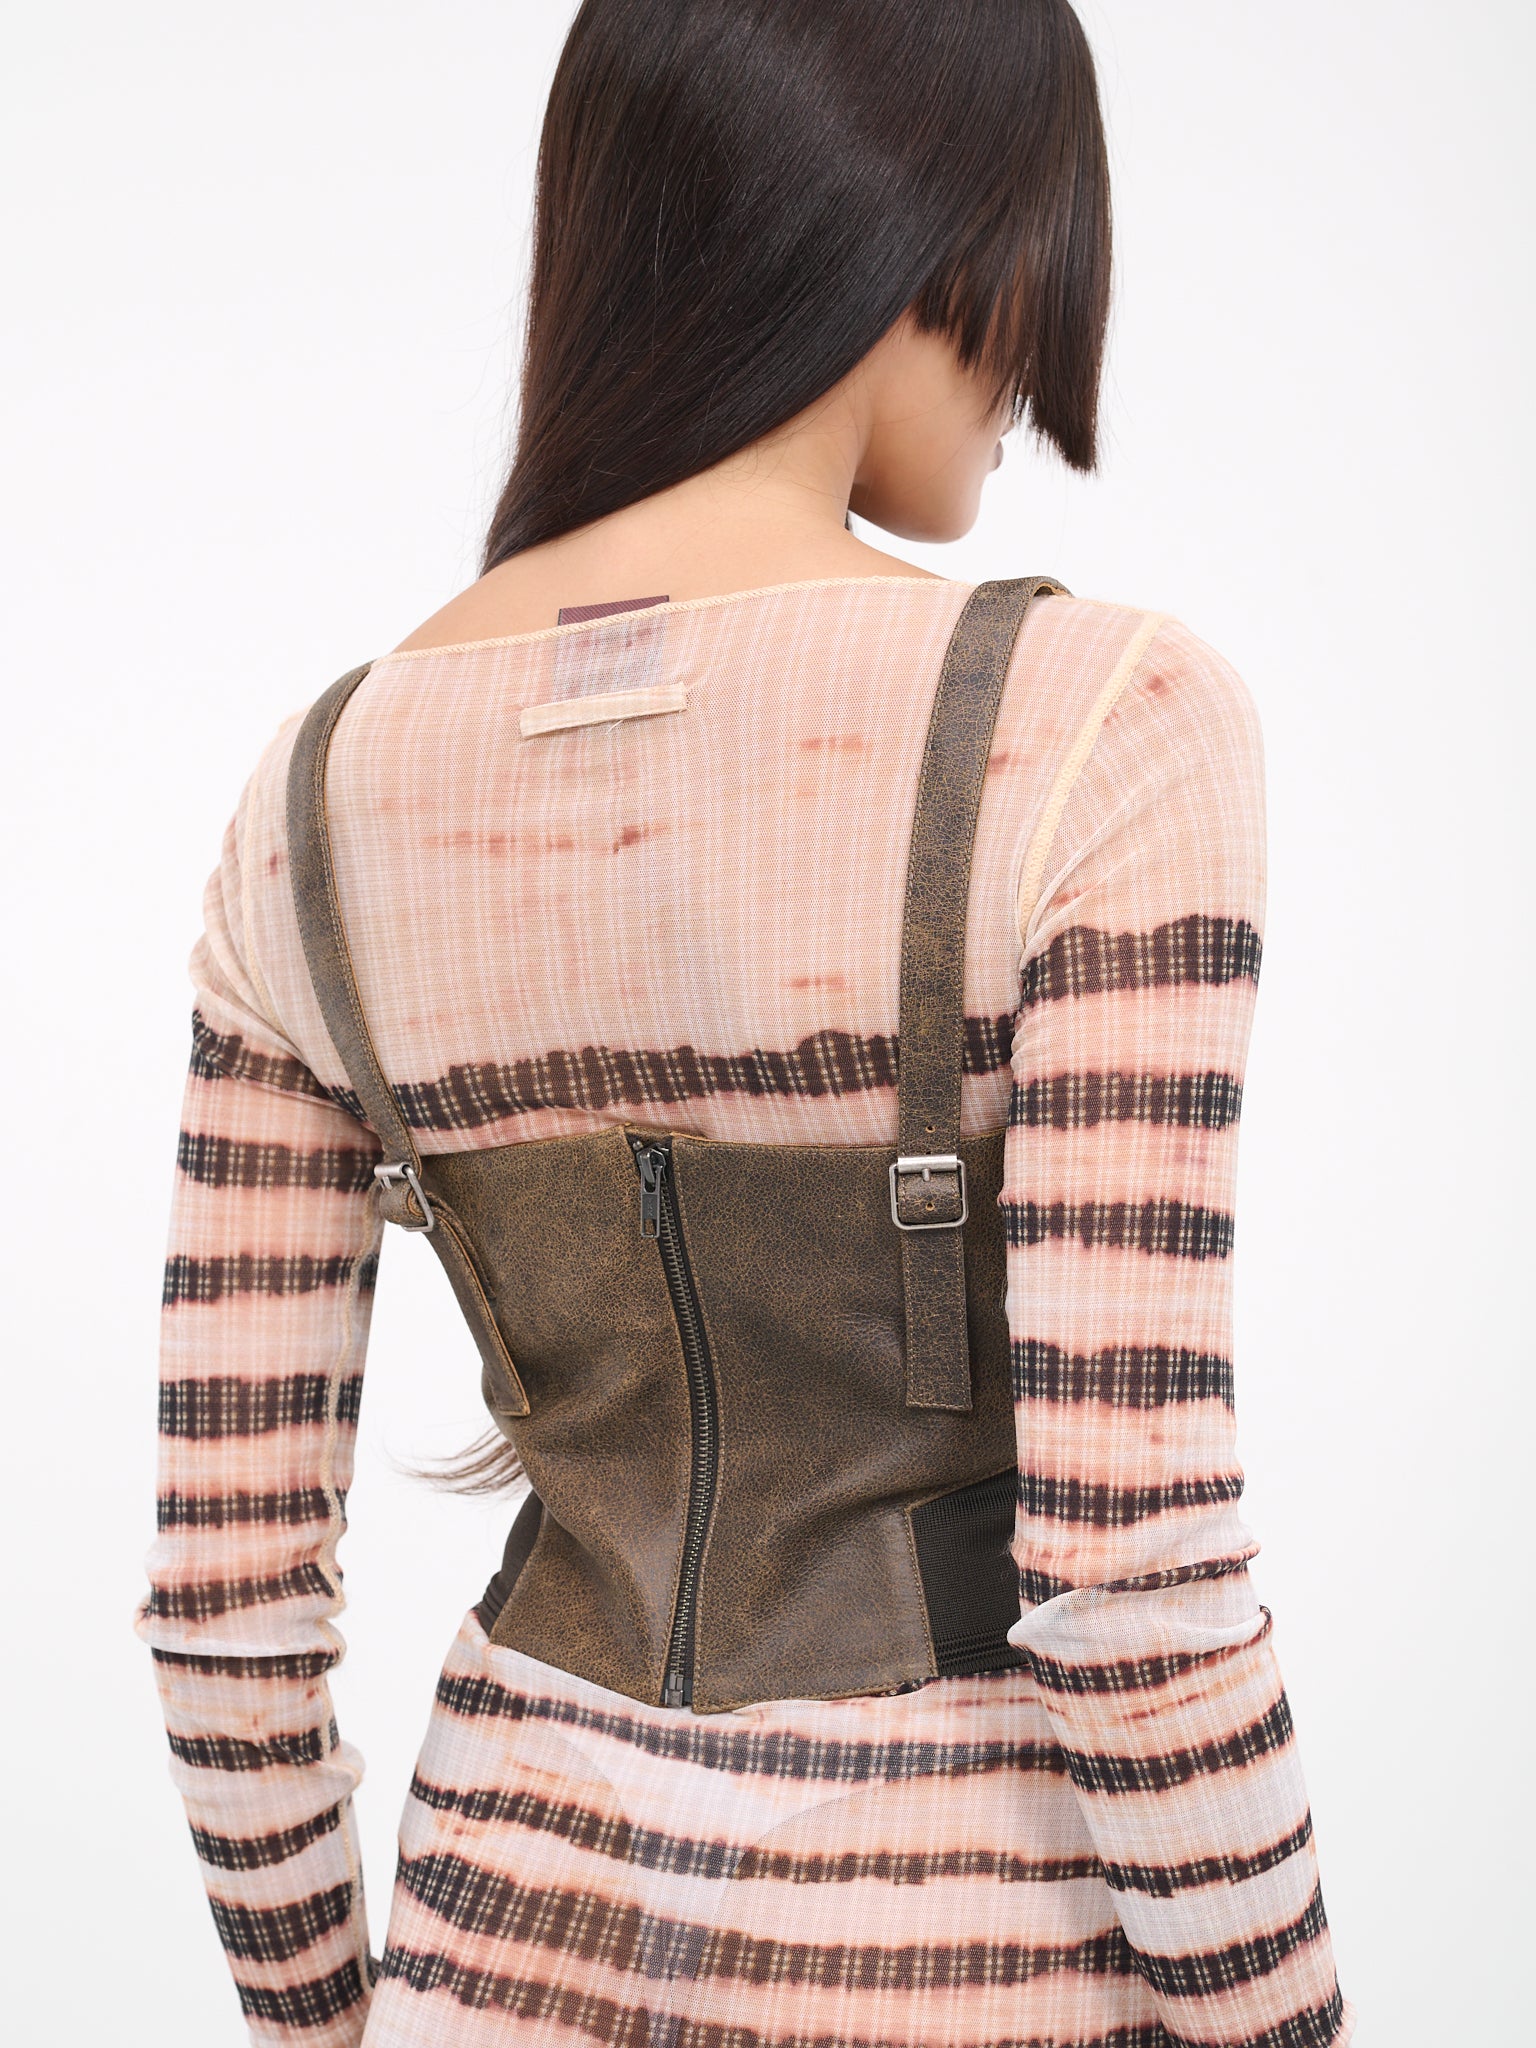 KNWLS Bustier Harness (TO089-L504-60-BROWN)